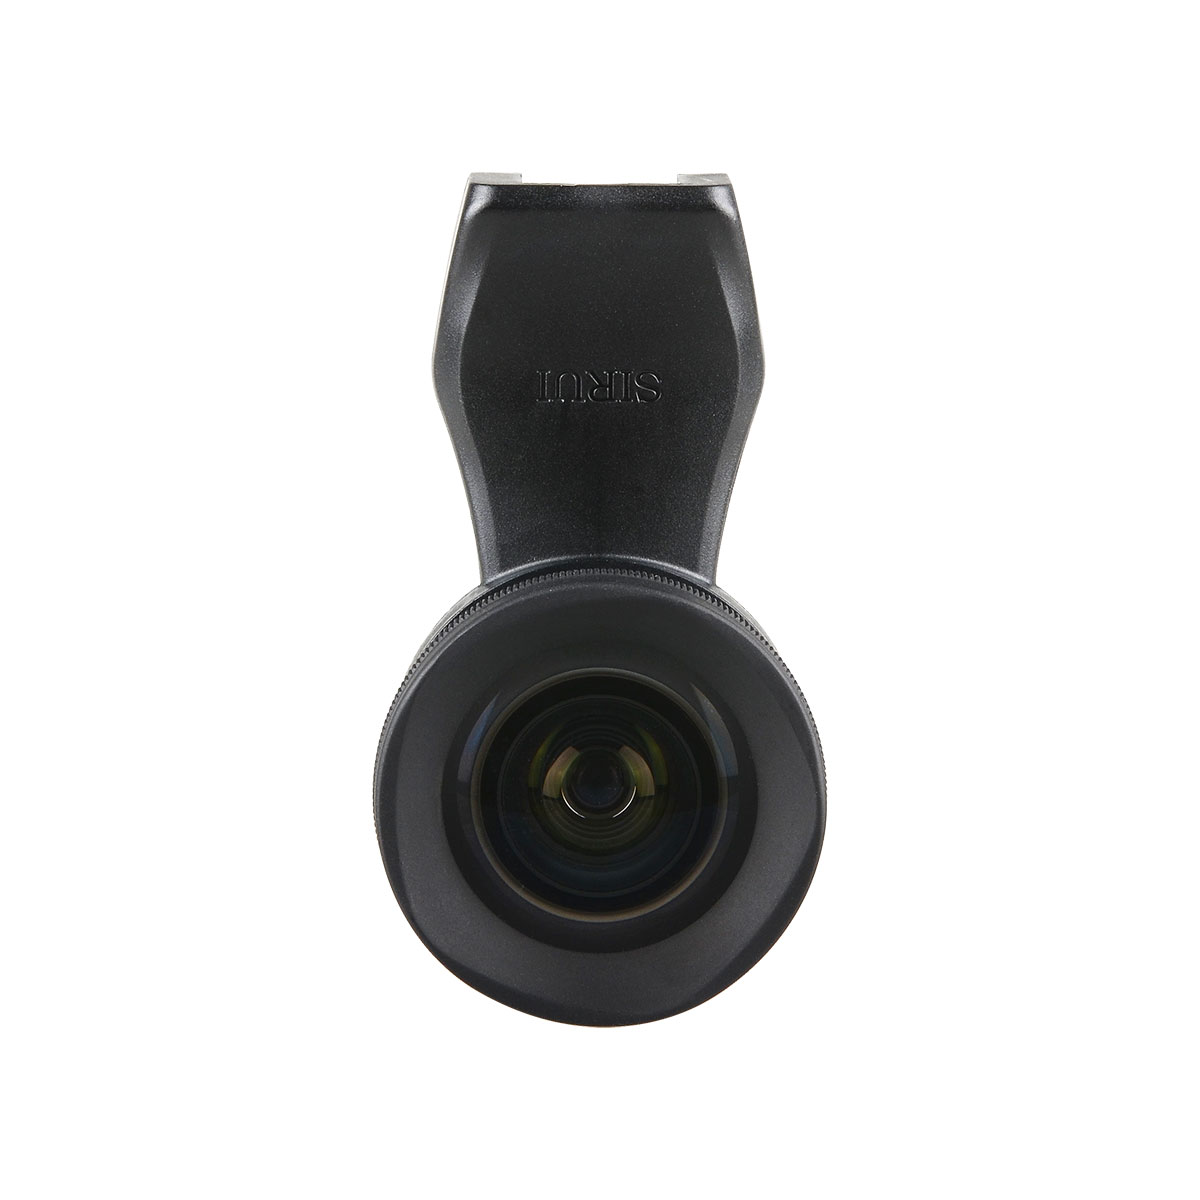 170° Fisheye Lens and 10X Macro Lens for iPhone Sirui 3 Lens Kit w/clip Made with German Schott Glass and Aluminum Housing Pixel Samsung Galaxy and most other Camera Phones 18mm Wide Angle Lens 